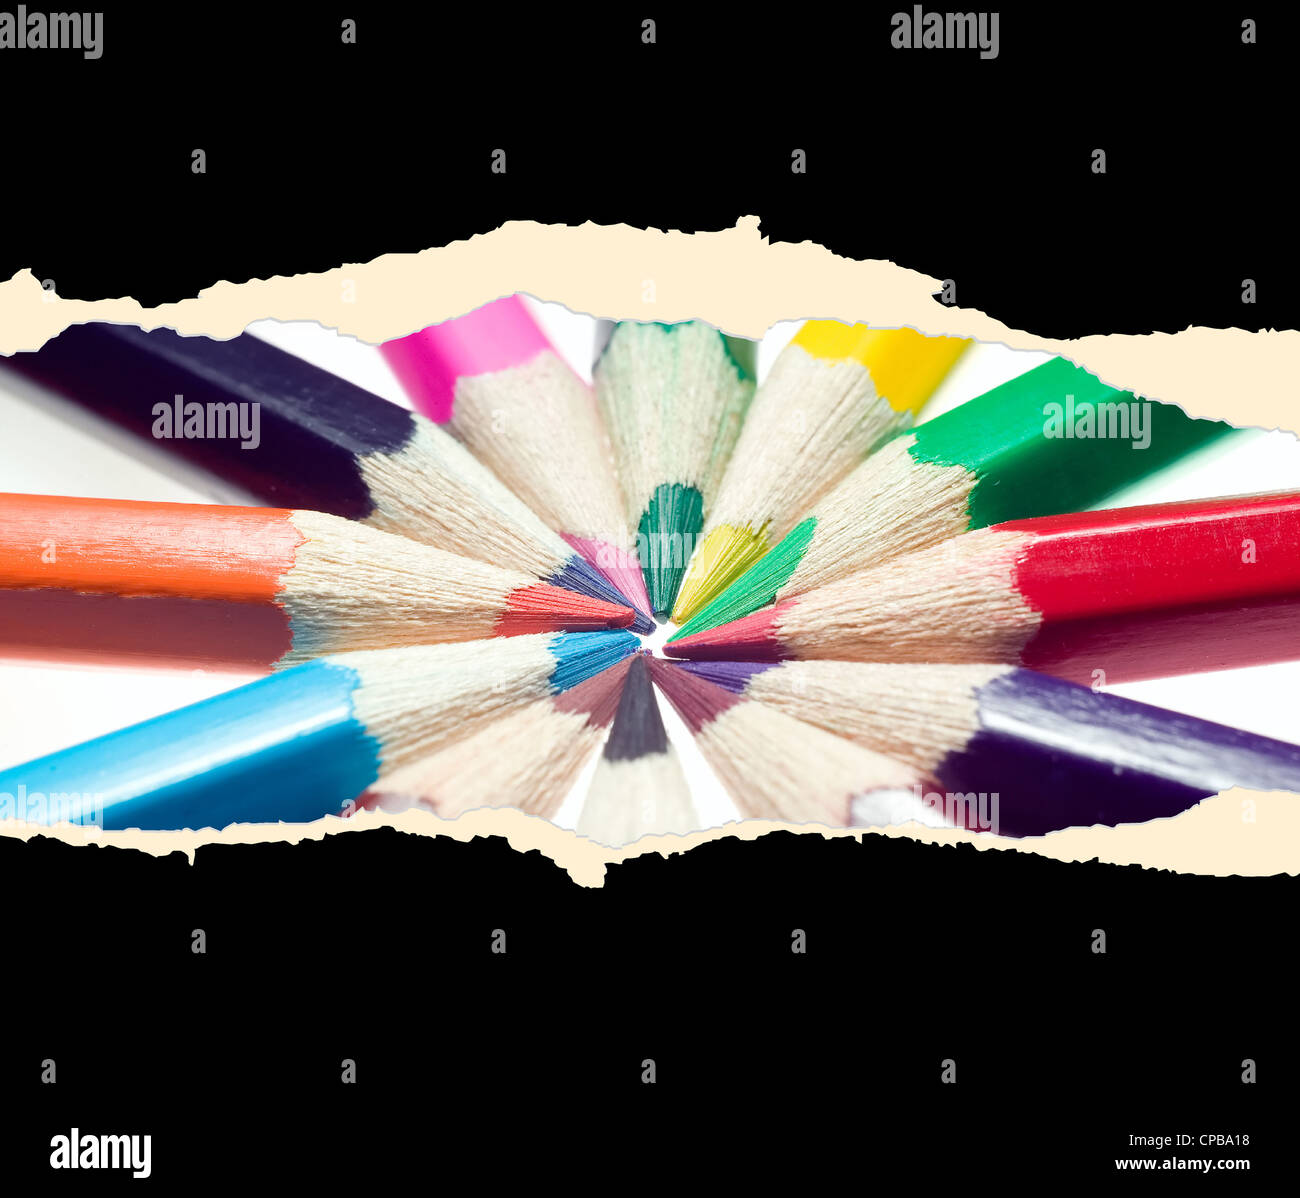 A sheet of paper with colorful pencils Stock Photo